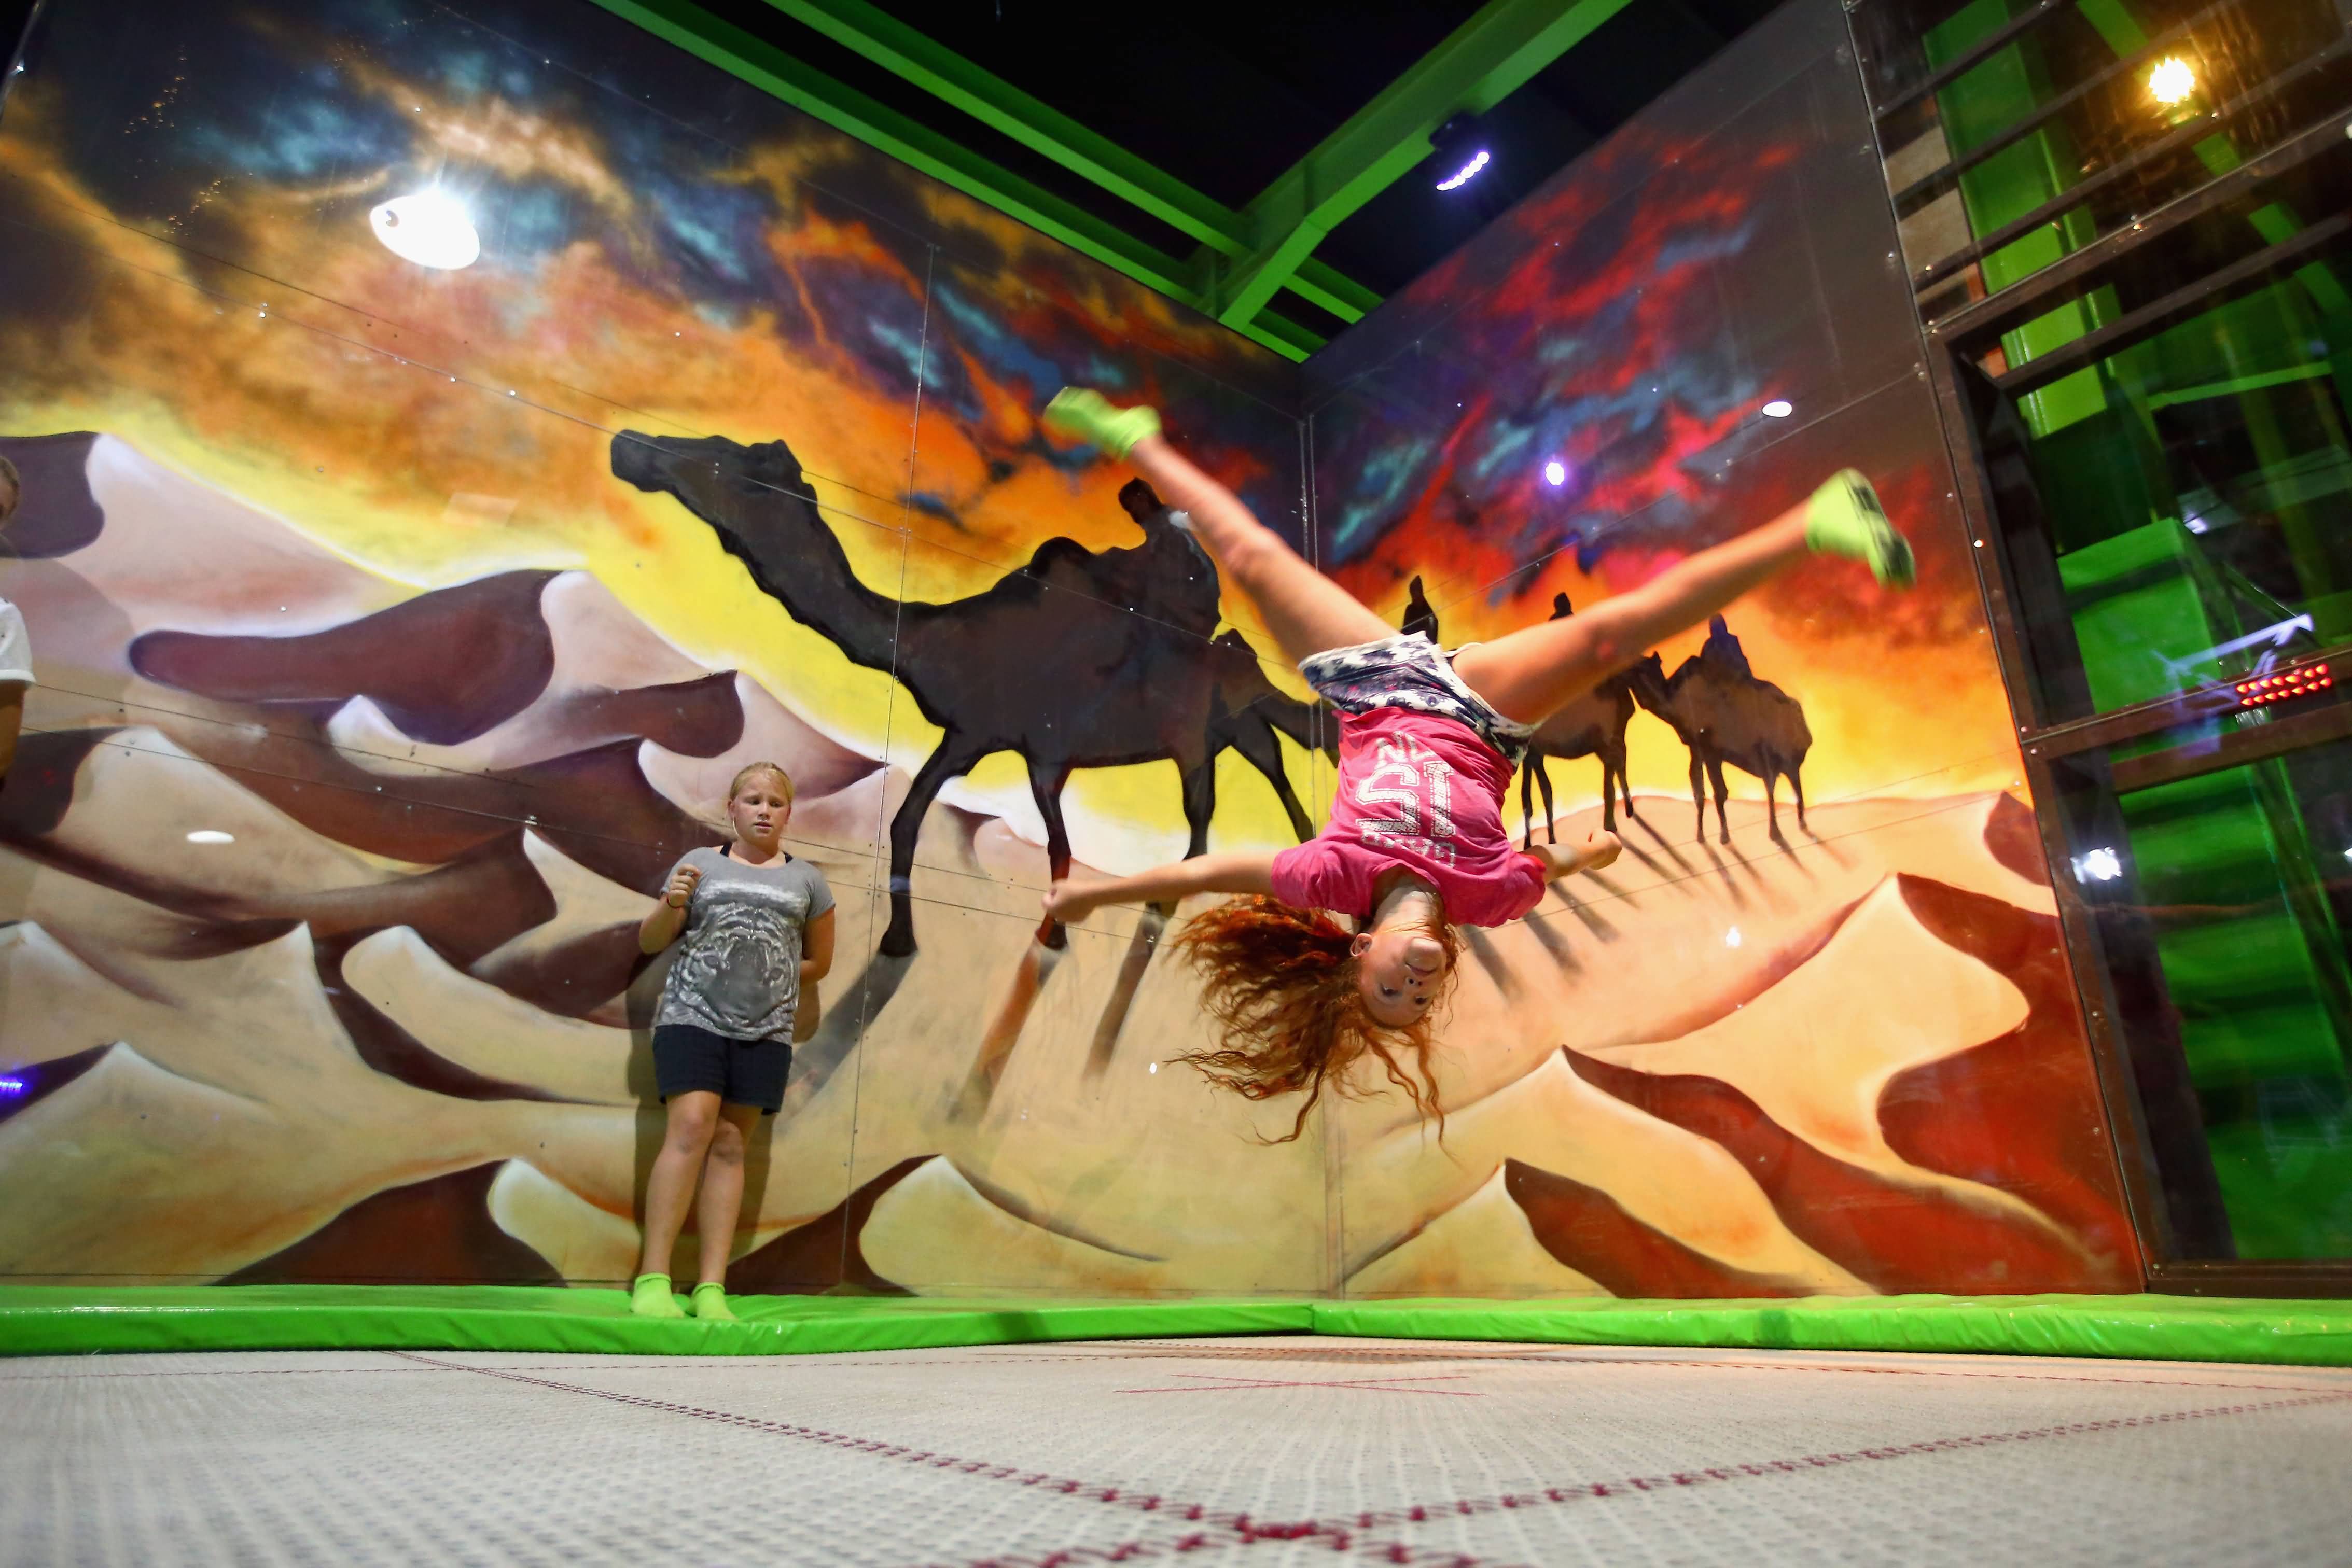 Flip Out Dubai Opening – New entertainment park concept boasts 200 interconnected trampolines and the Middle East’s first Archery Tag fields